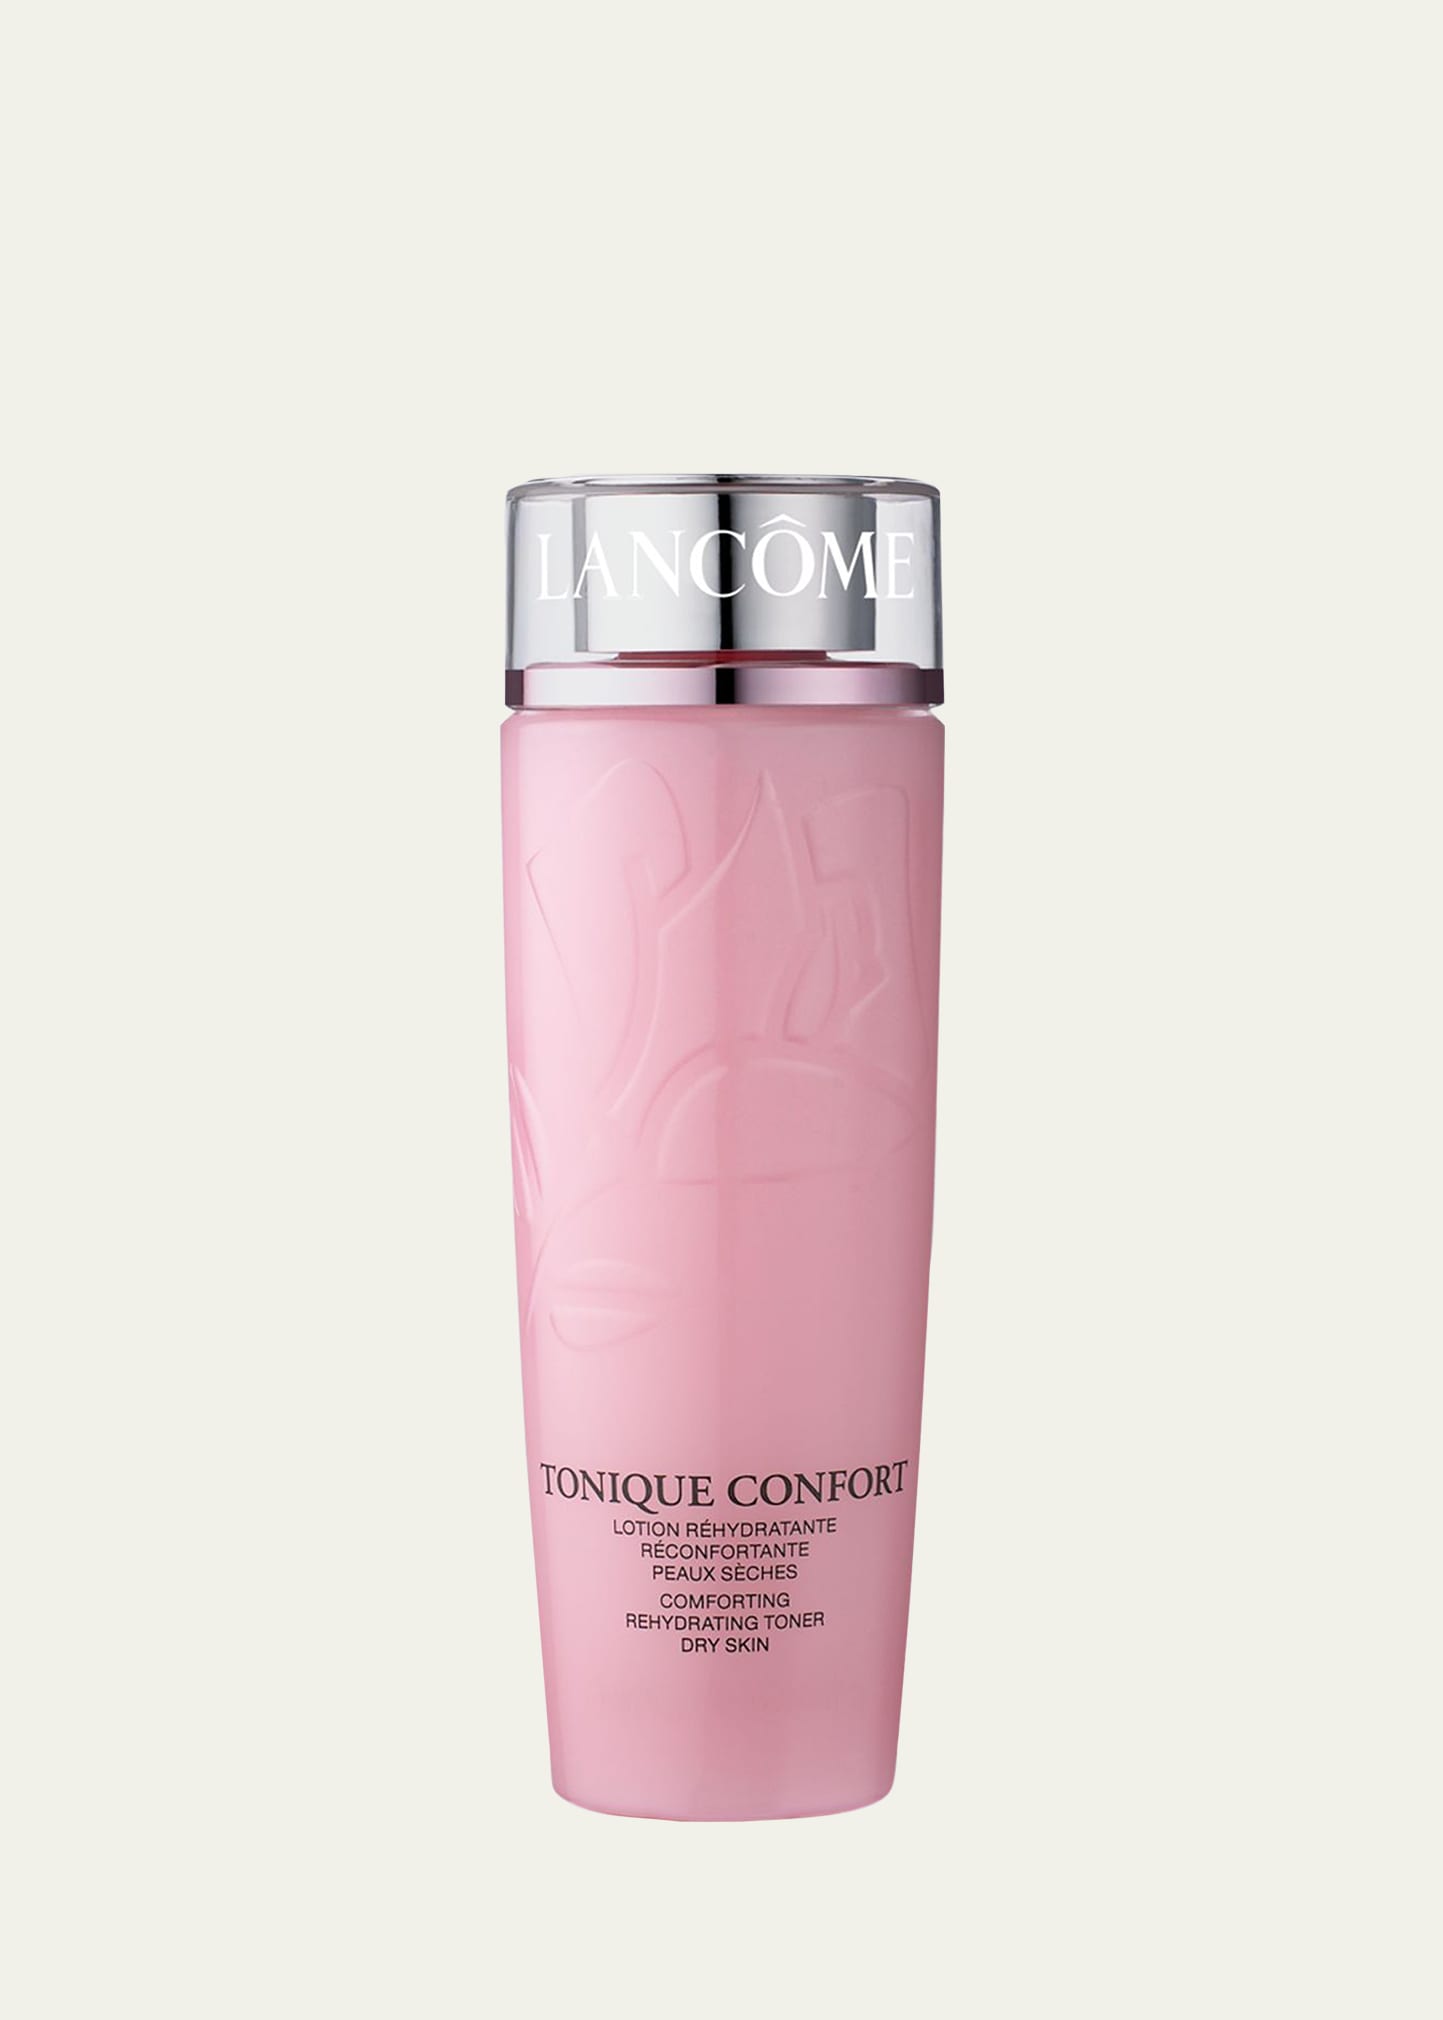 Tonique Confort Re-Hydrating Comforting Toner with Acacia Honey, 13.4 oz.